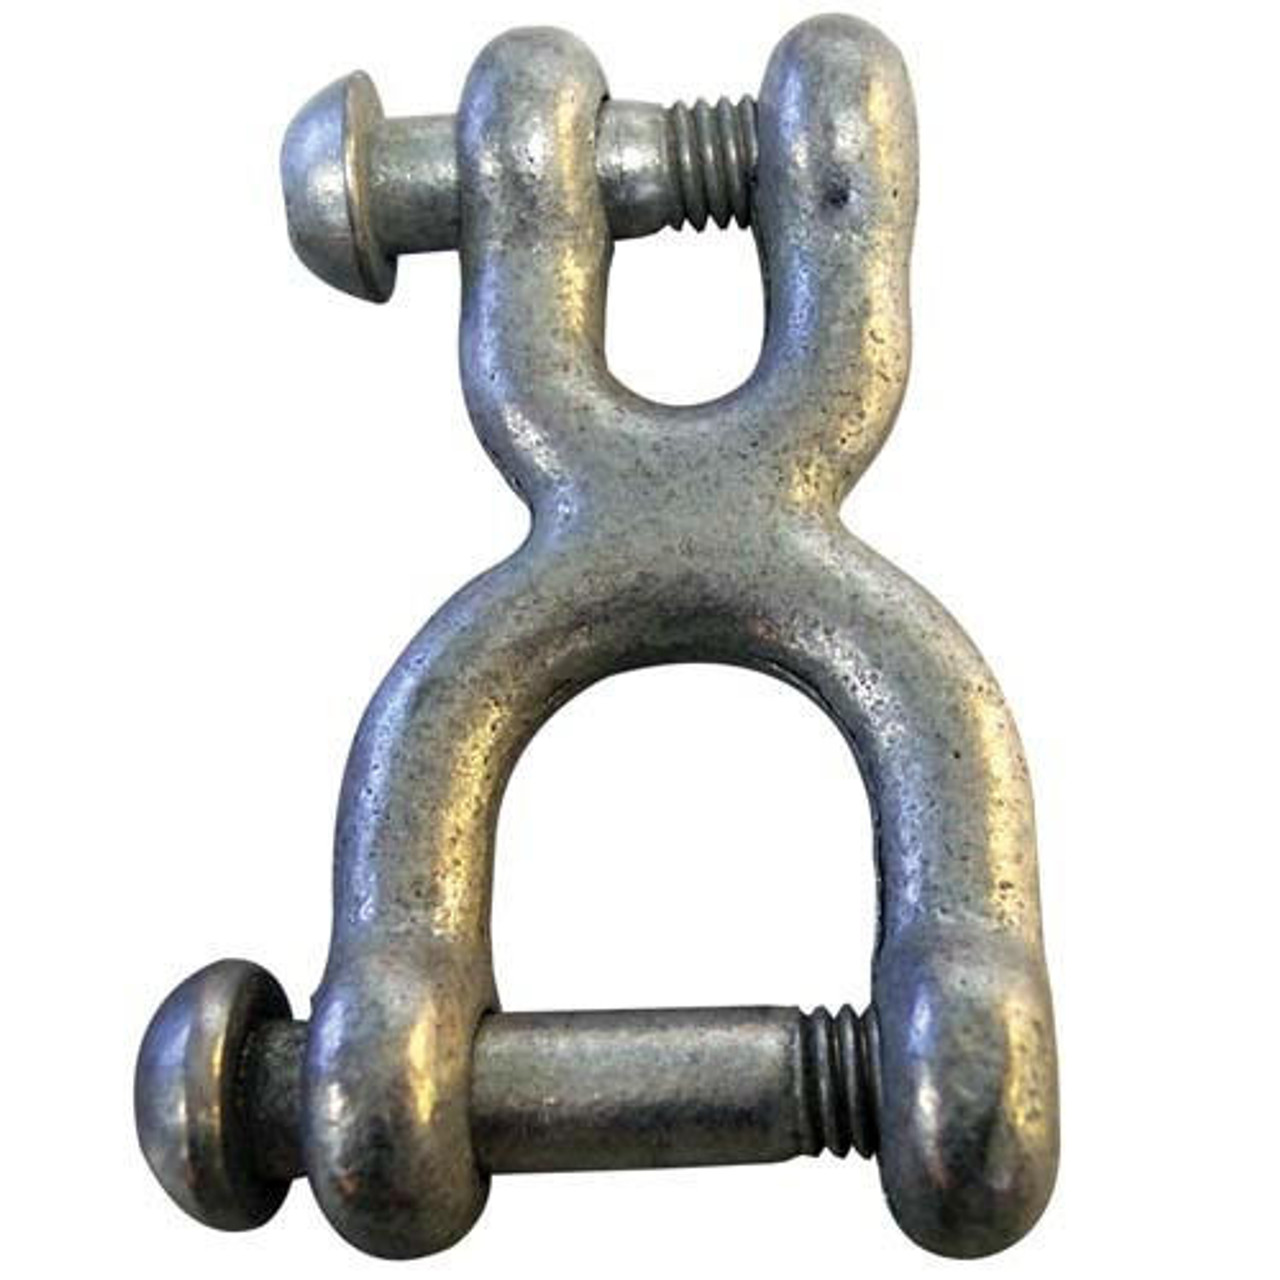 https://cdn11.bigcommerce.com/s-36yz7qwnyo/images/stencil/1280x1280/products/5451/52311/jensen-swing-jensen-replacement-safety-swing-shackle-h-hook-516wt-bolt-38-dia-1-12-bolt-chain-to-hanger__03368.1683089481.jpg?c=1